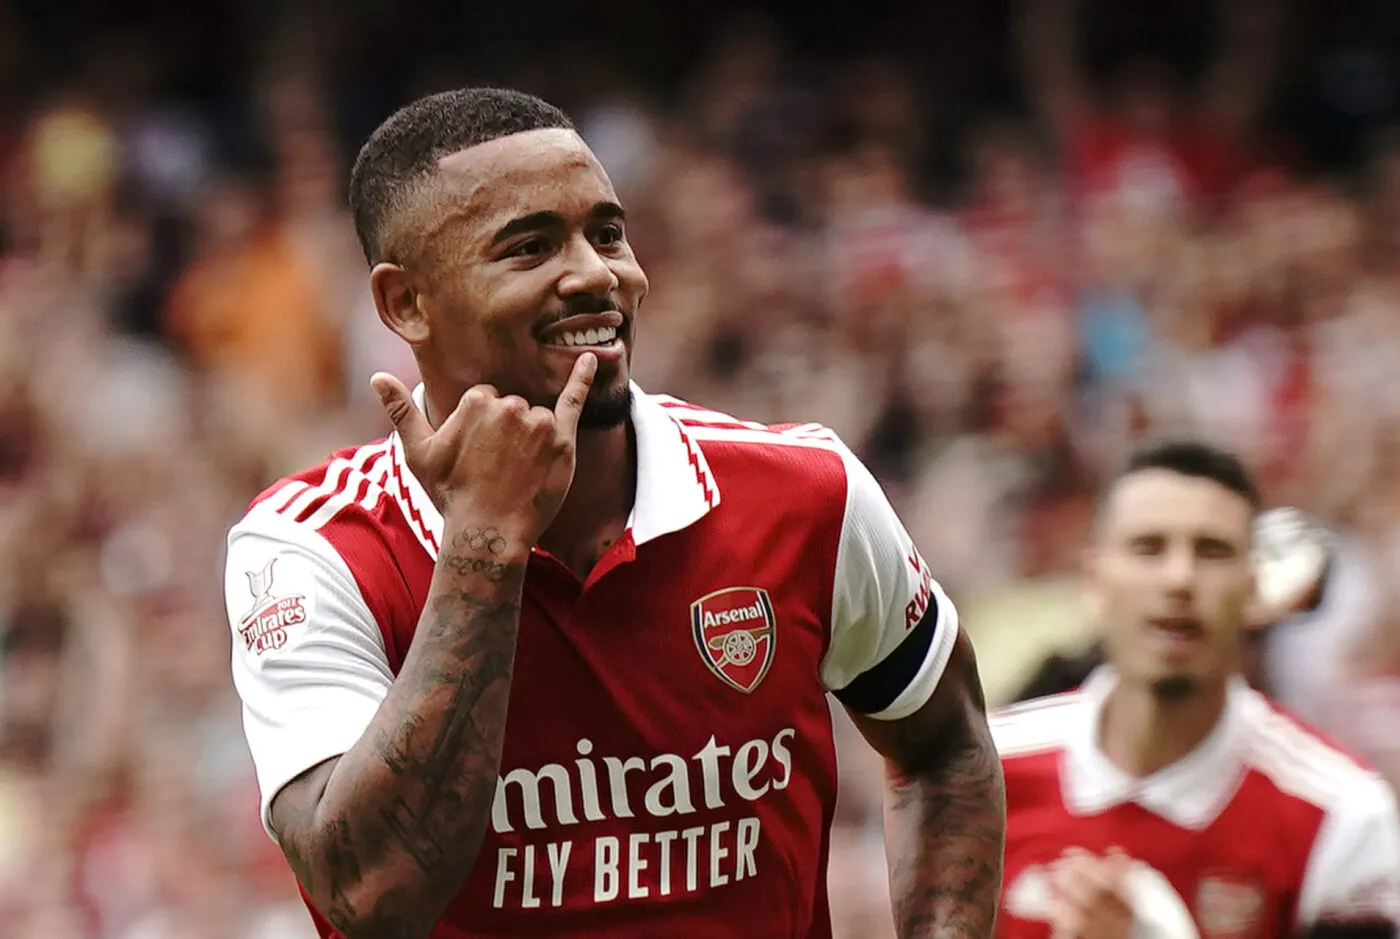 Arsenal's Gabriel Jesus celebrates scoring their side's second goal of the game during the Emirates Cup final at the Emirates Stadium, London. Picture date: Saturday July 30, 2022. - Photo by Icon sport